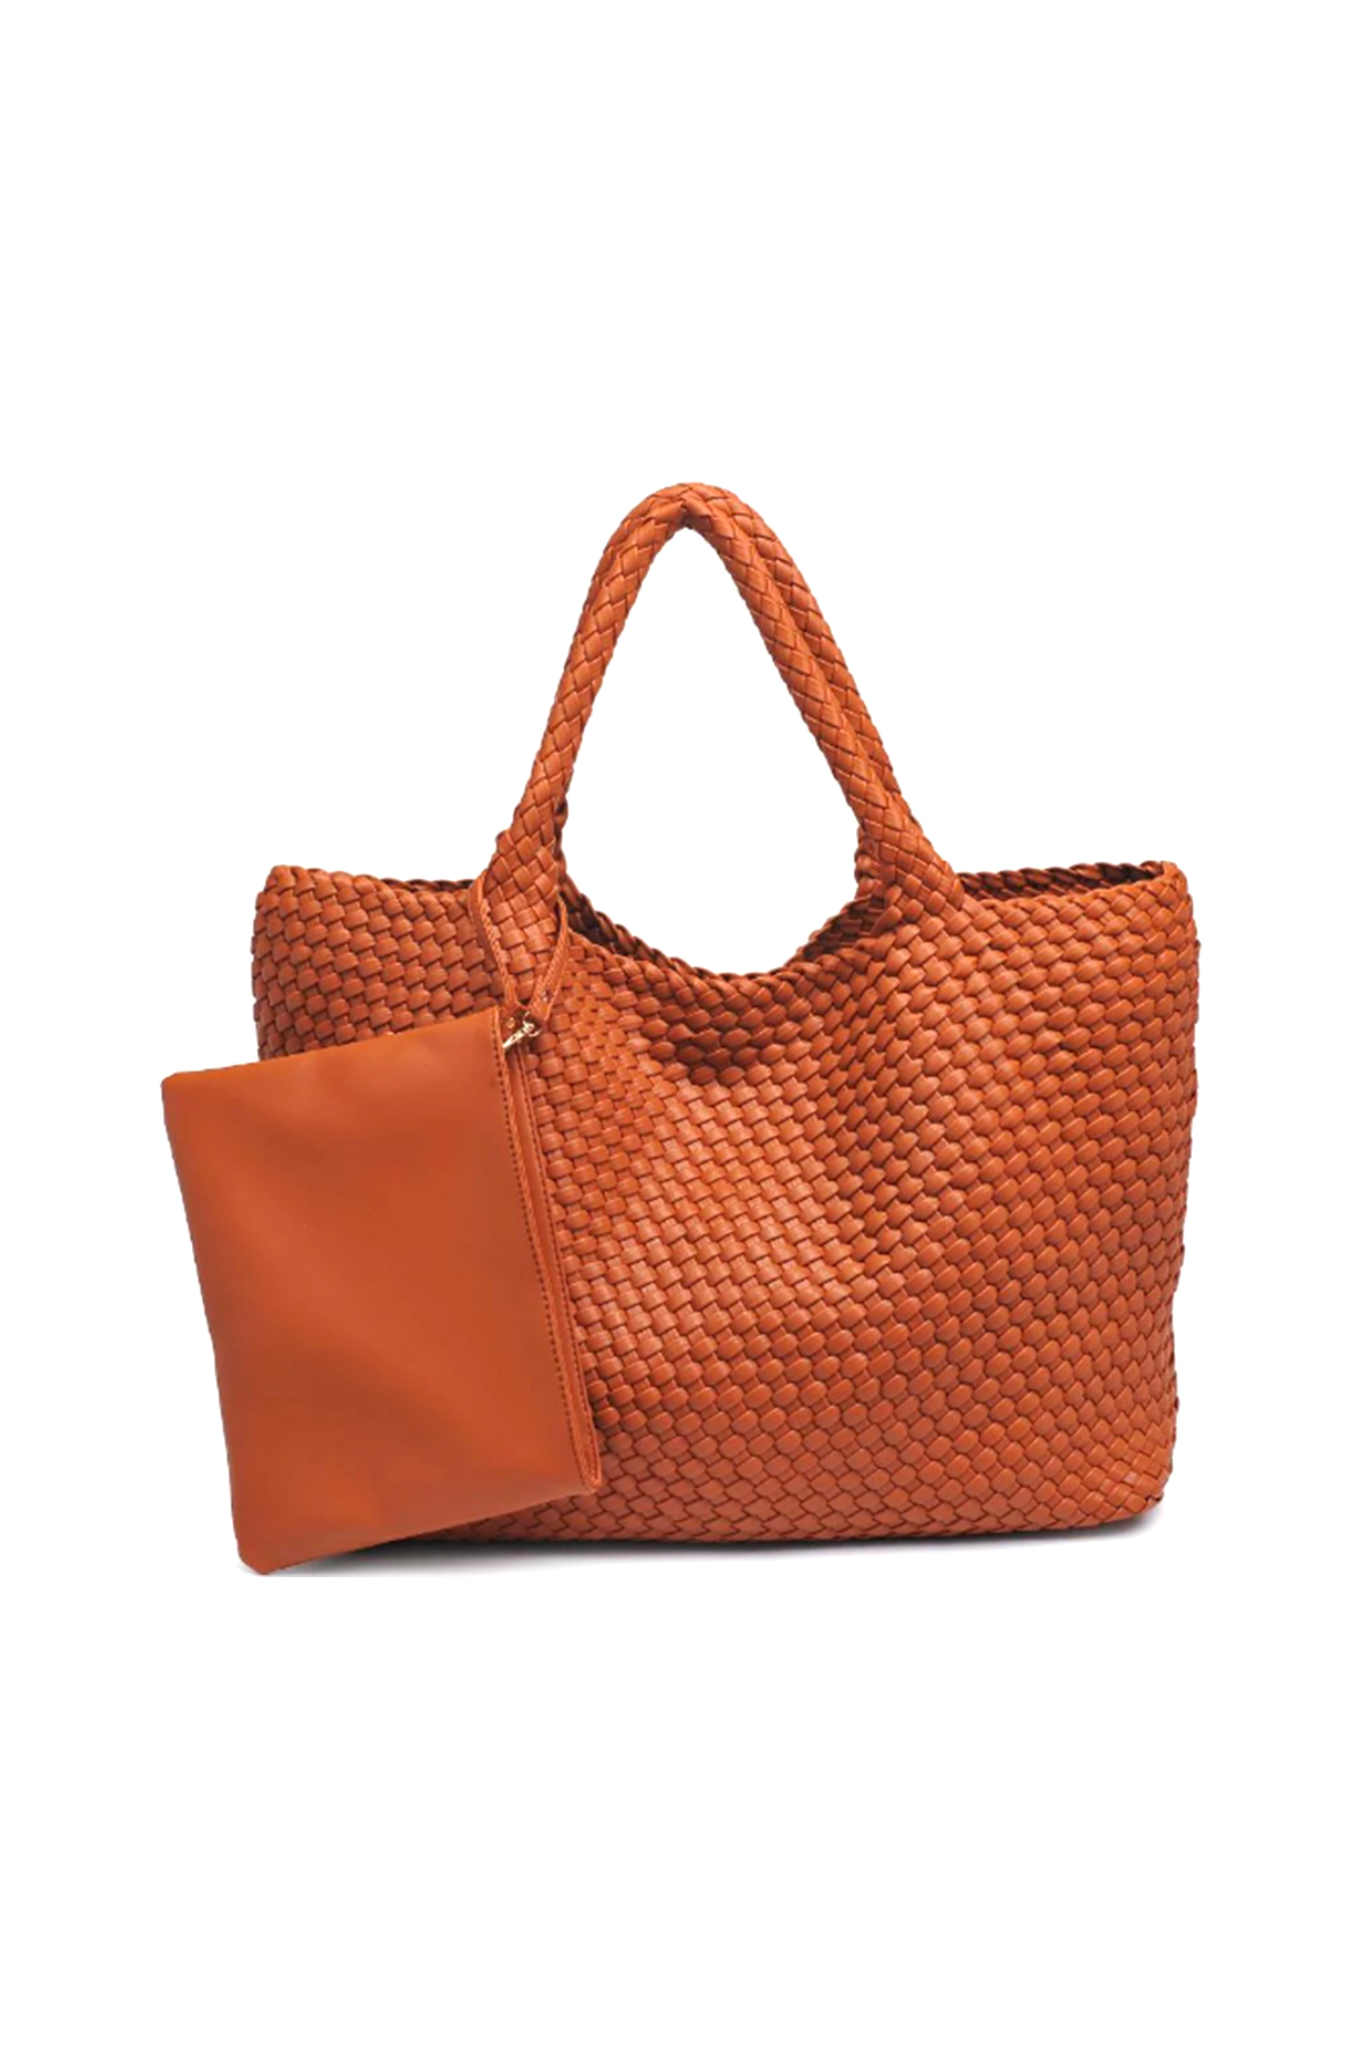 View 1 of Woven Tote Bag, a Bags from Larrea Cove. Detail: 
<div class="shopify-section product-template product-main has-sid...